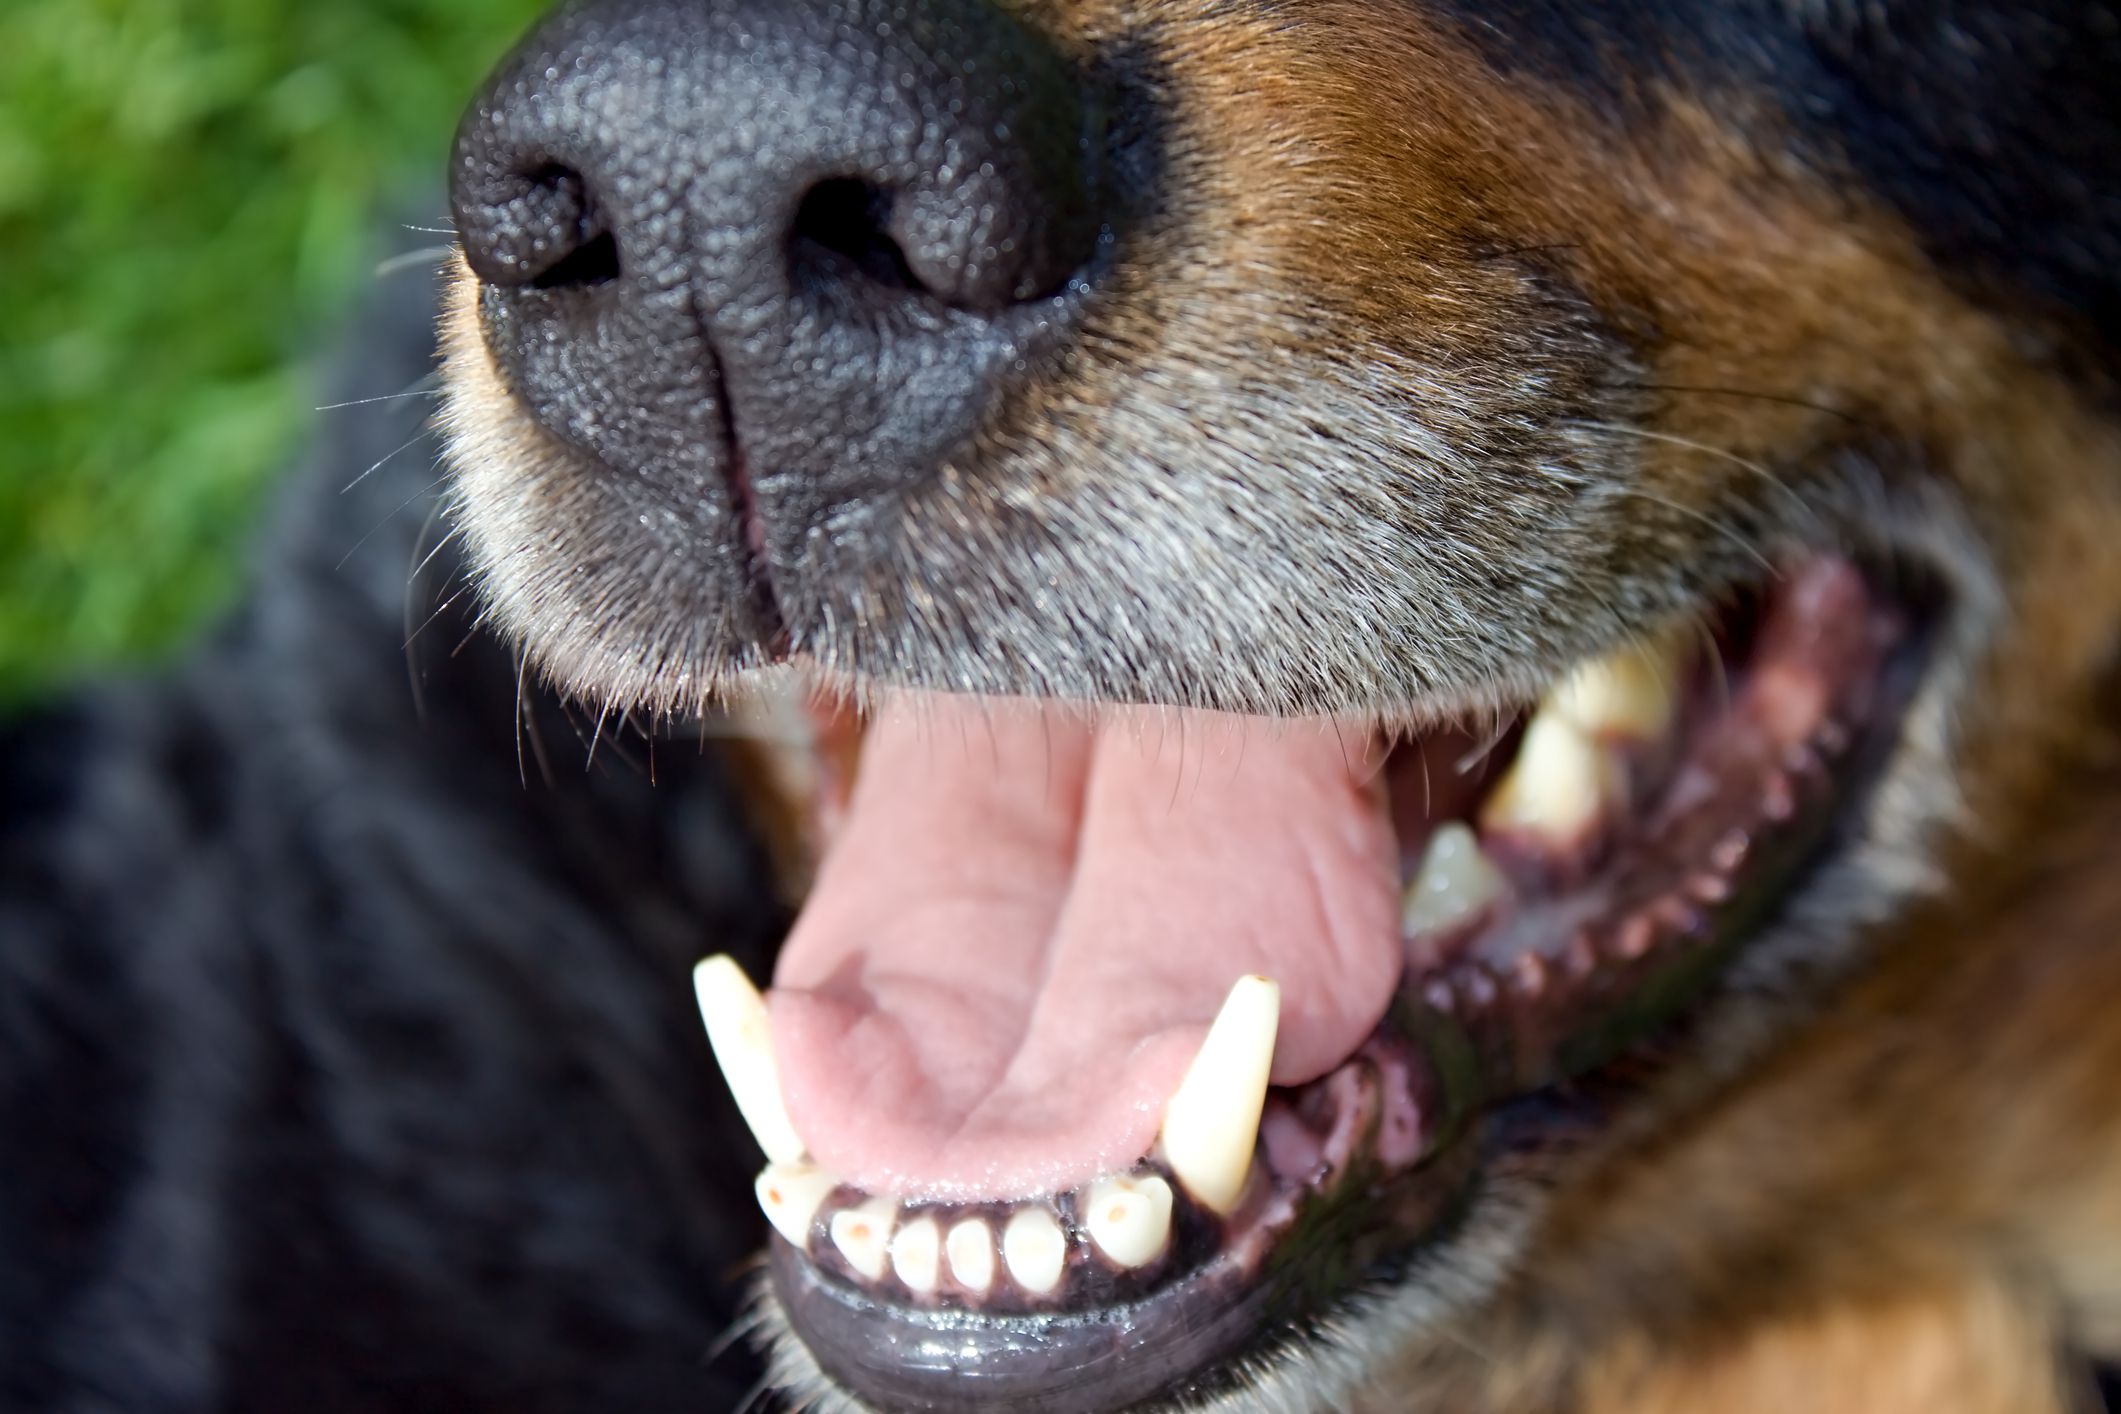 What Does Cancer Look Like In A Dog’s Mouth